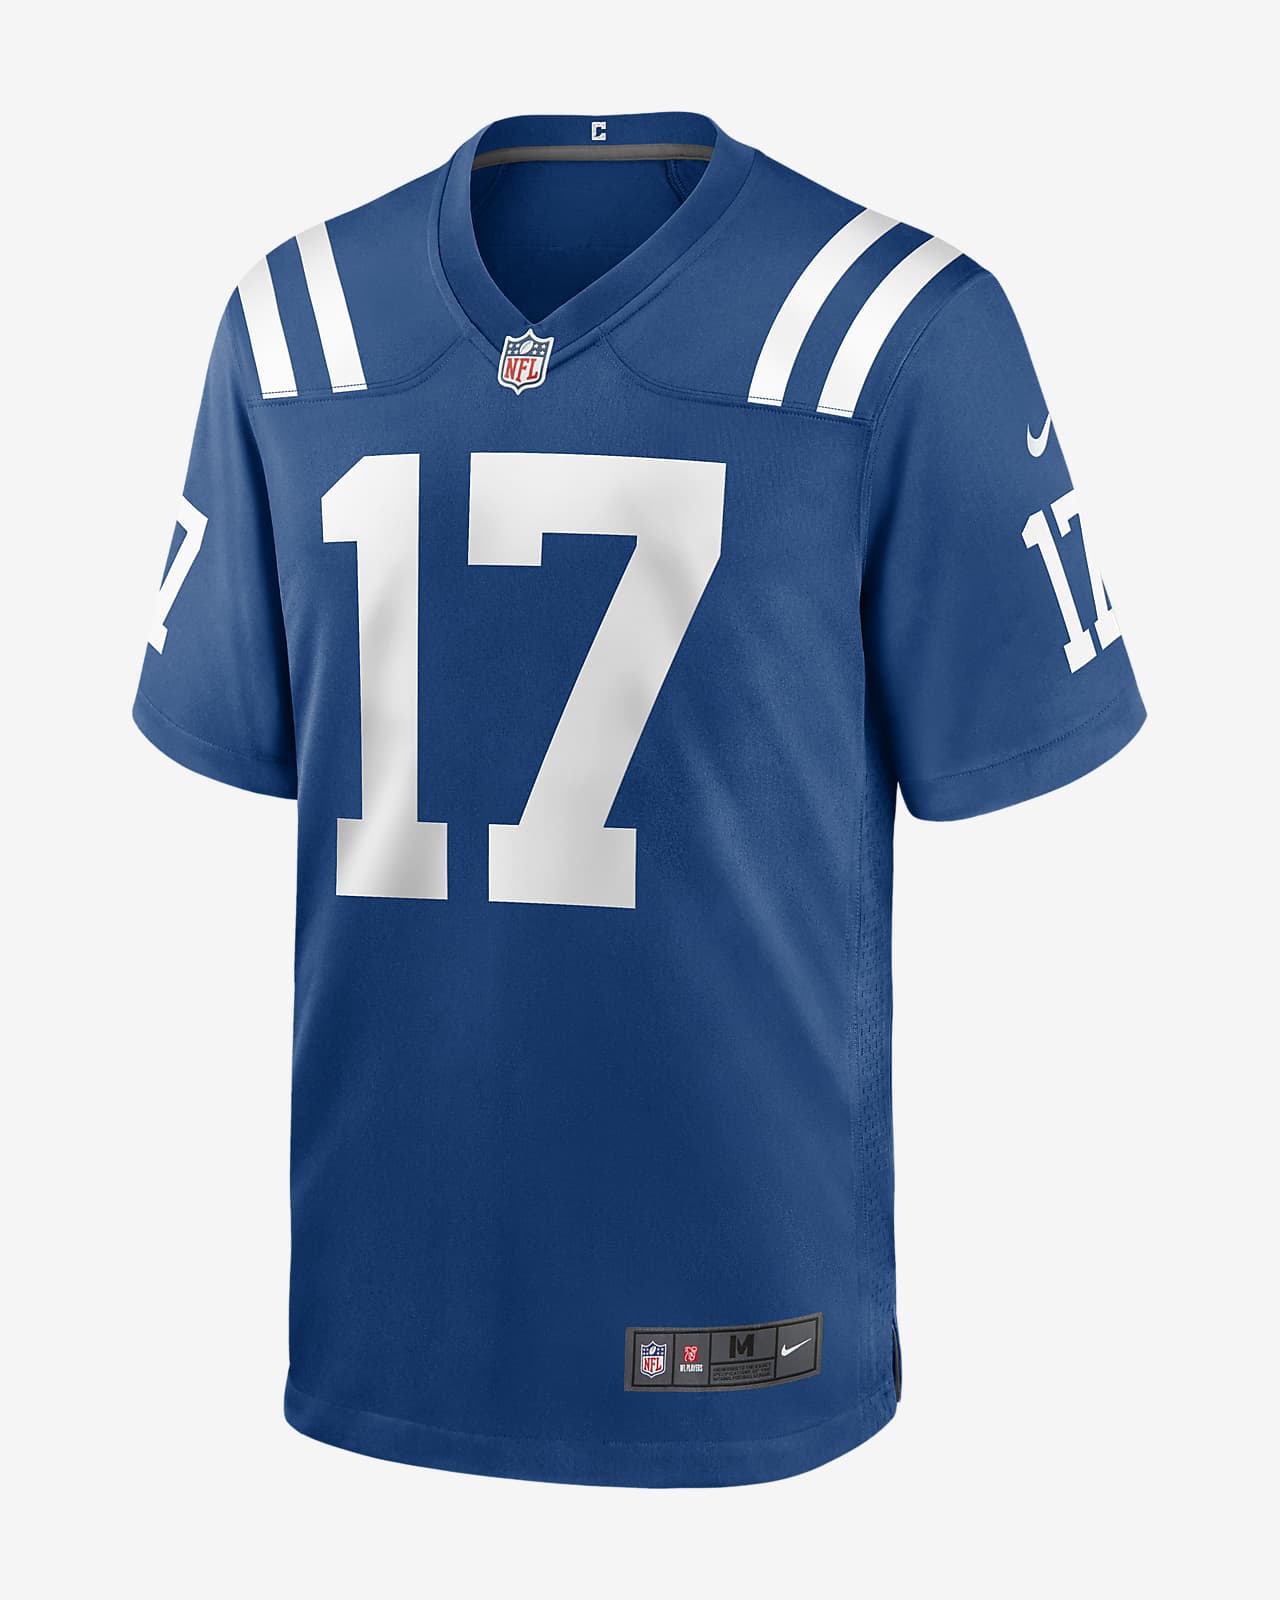 NFL Indianapolis Colts (Philip Rivers) Men's Game Football Jersey